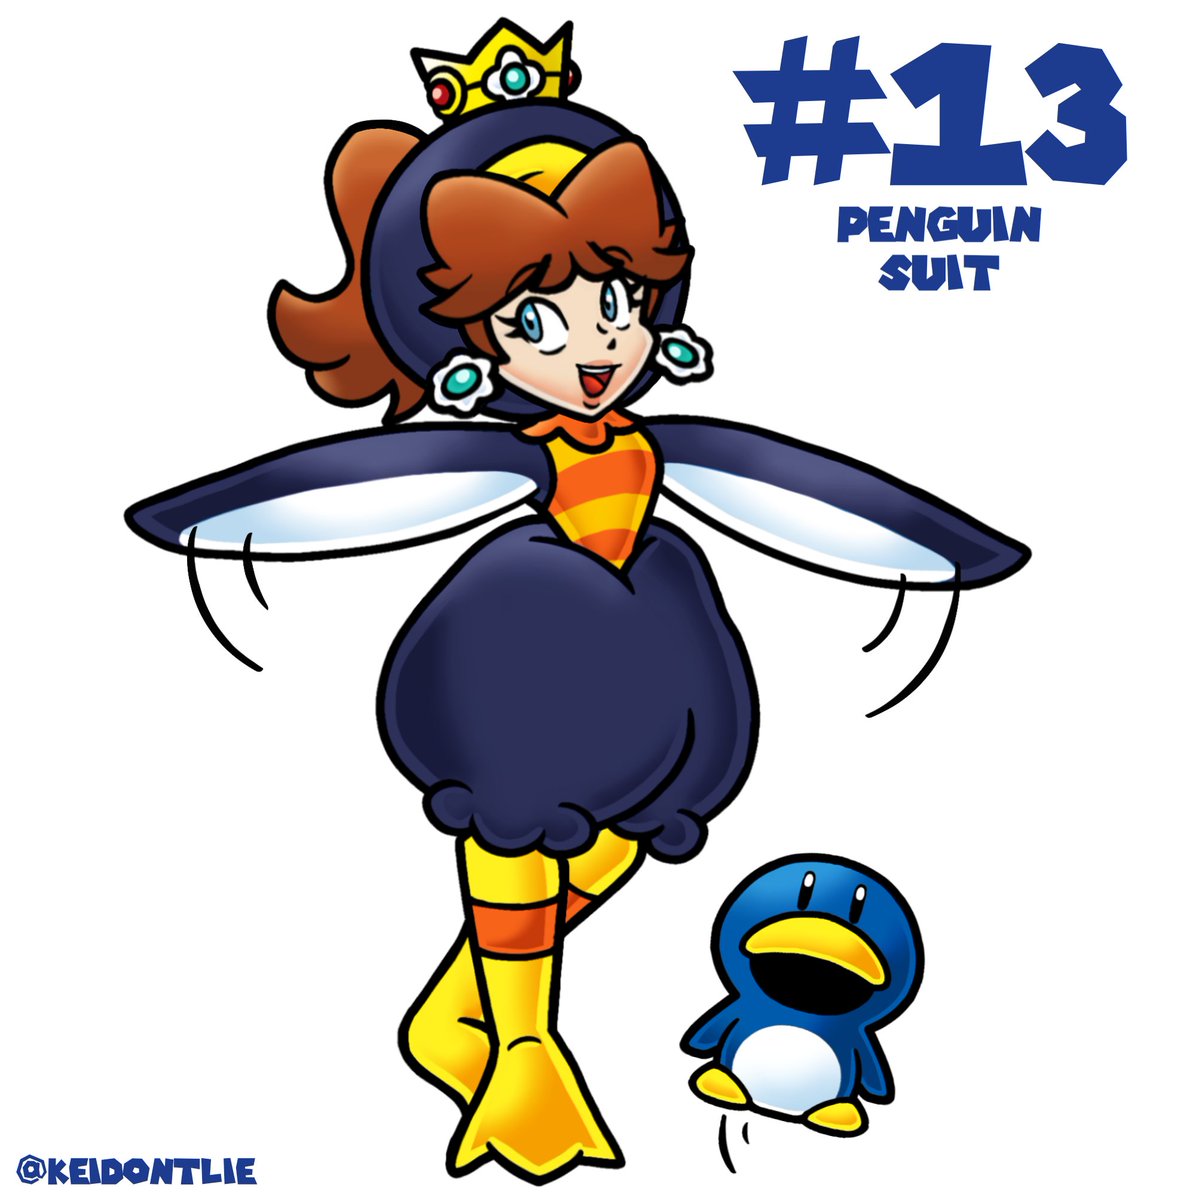 Half way through! The penguin suit is also a power up from NSMB Wii, its not really my favorite since its another suit power up but here it is! 🐧🌼 Transforms Daisy into Penguin Daisy. #PrincessDaisy #SuperMario #MarioBros #Fanart #PowerUpDaisy